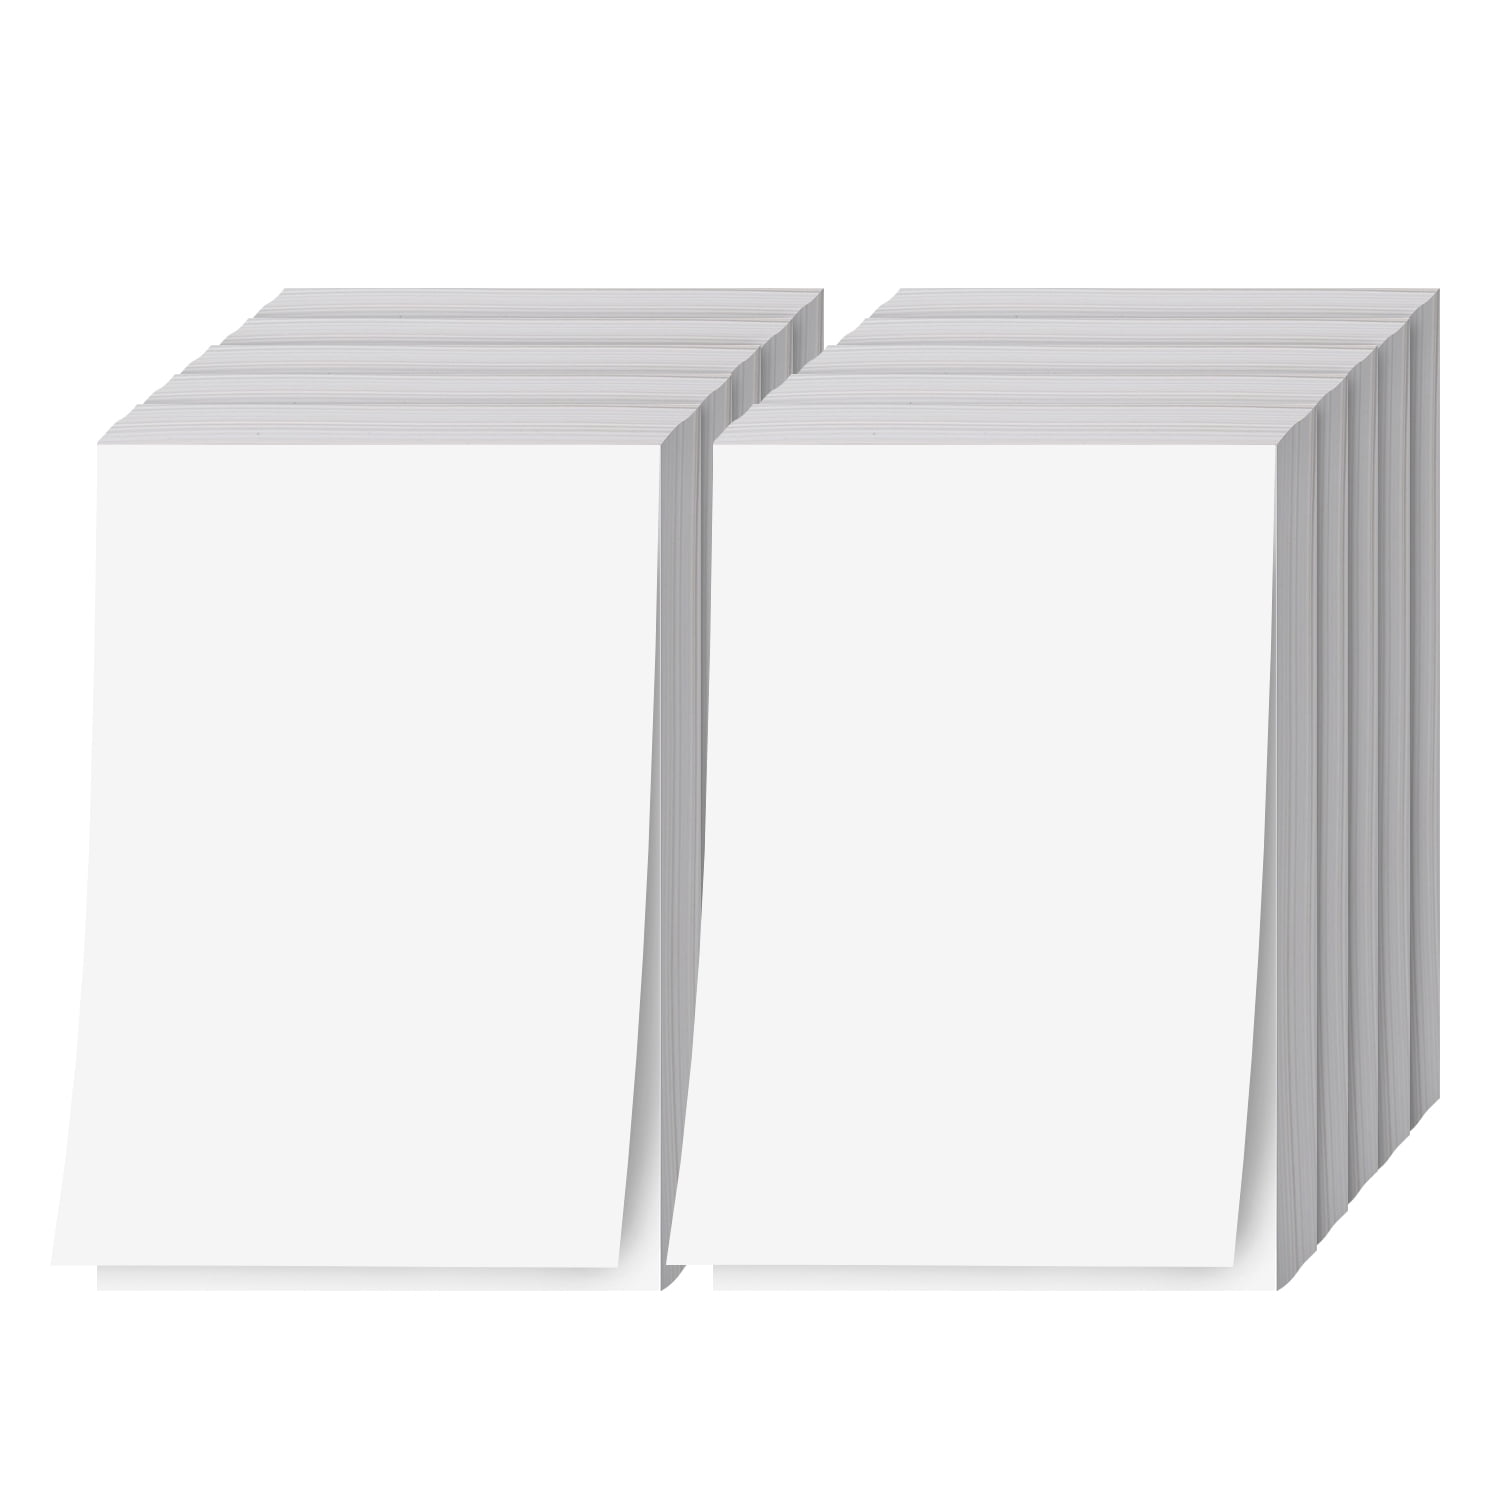 White 4 x 6 Note Pads / Memo Pads / Scratch Pads / Writing ...